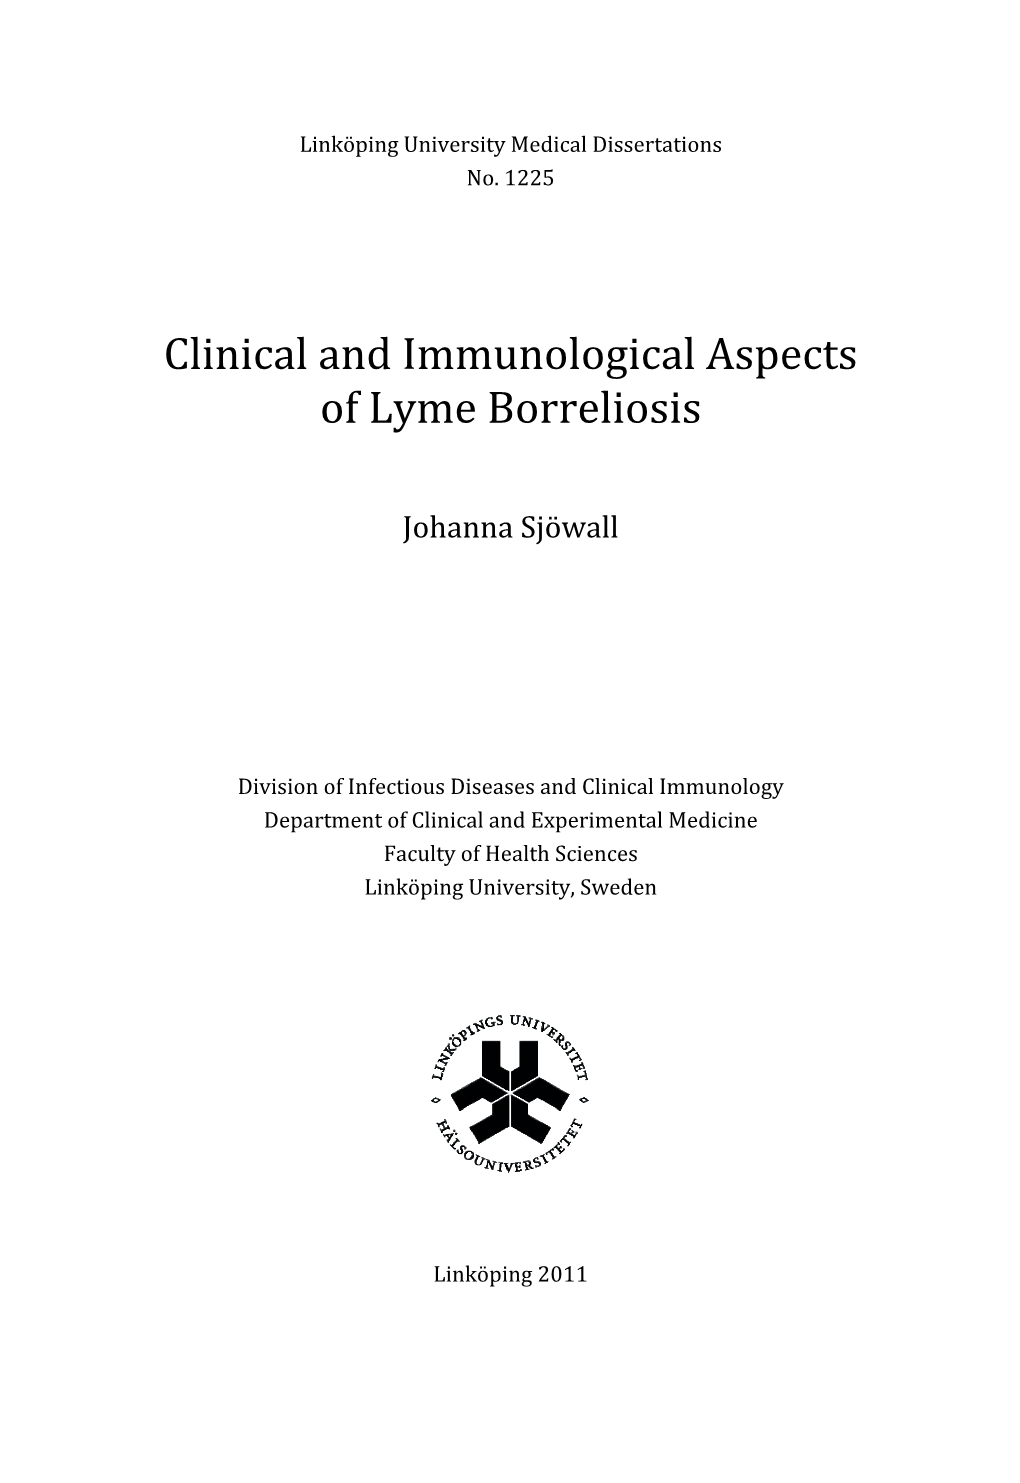 Clinical and Immunological Aspects of Lyme Borreliosis